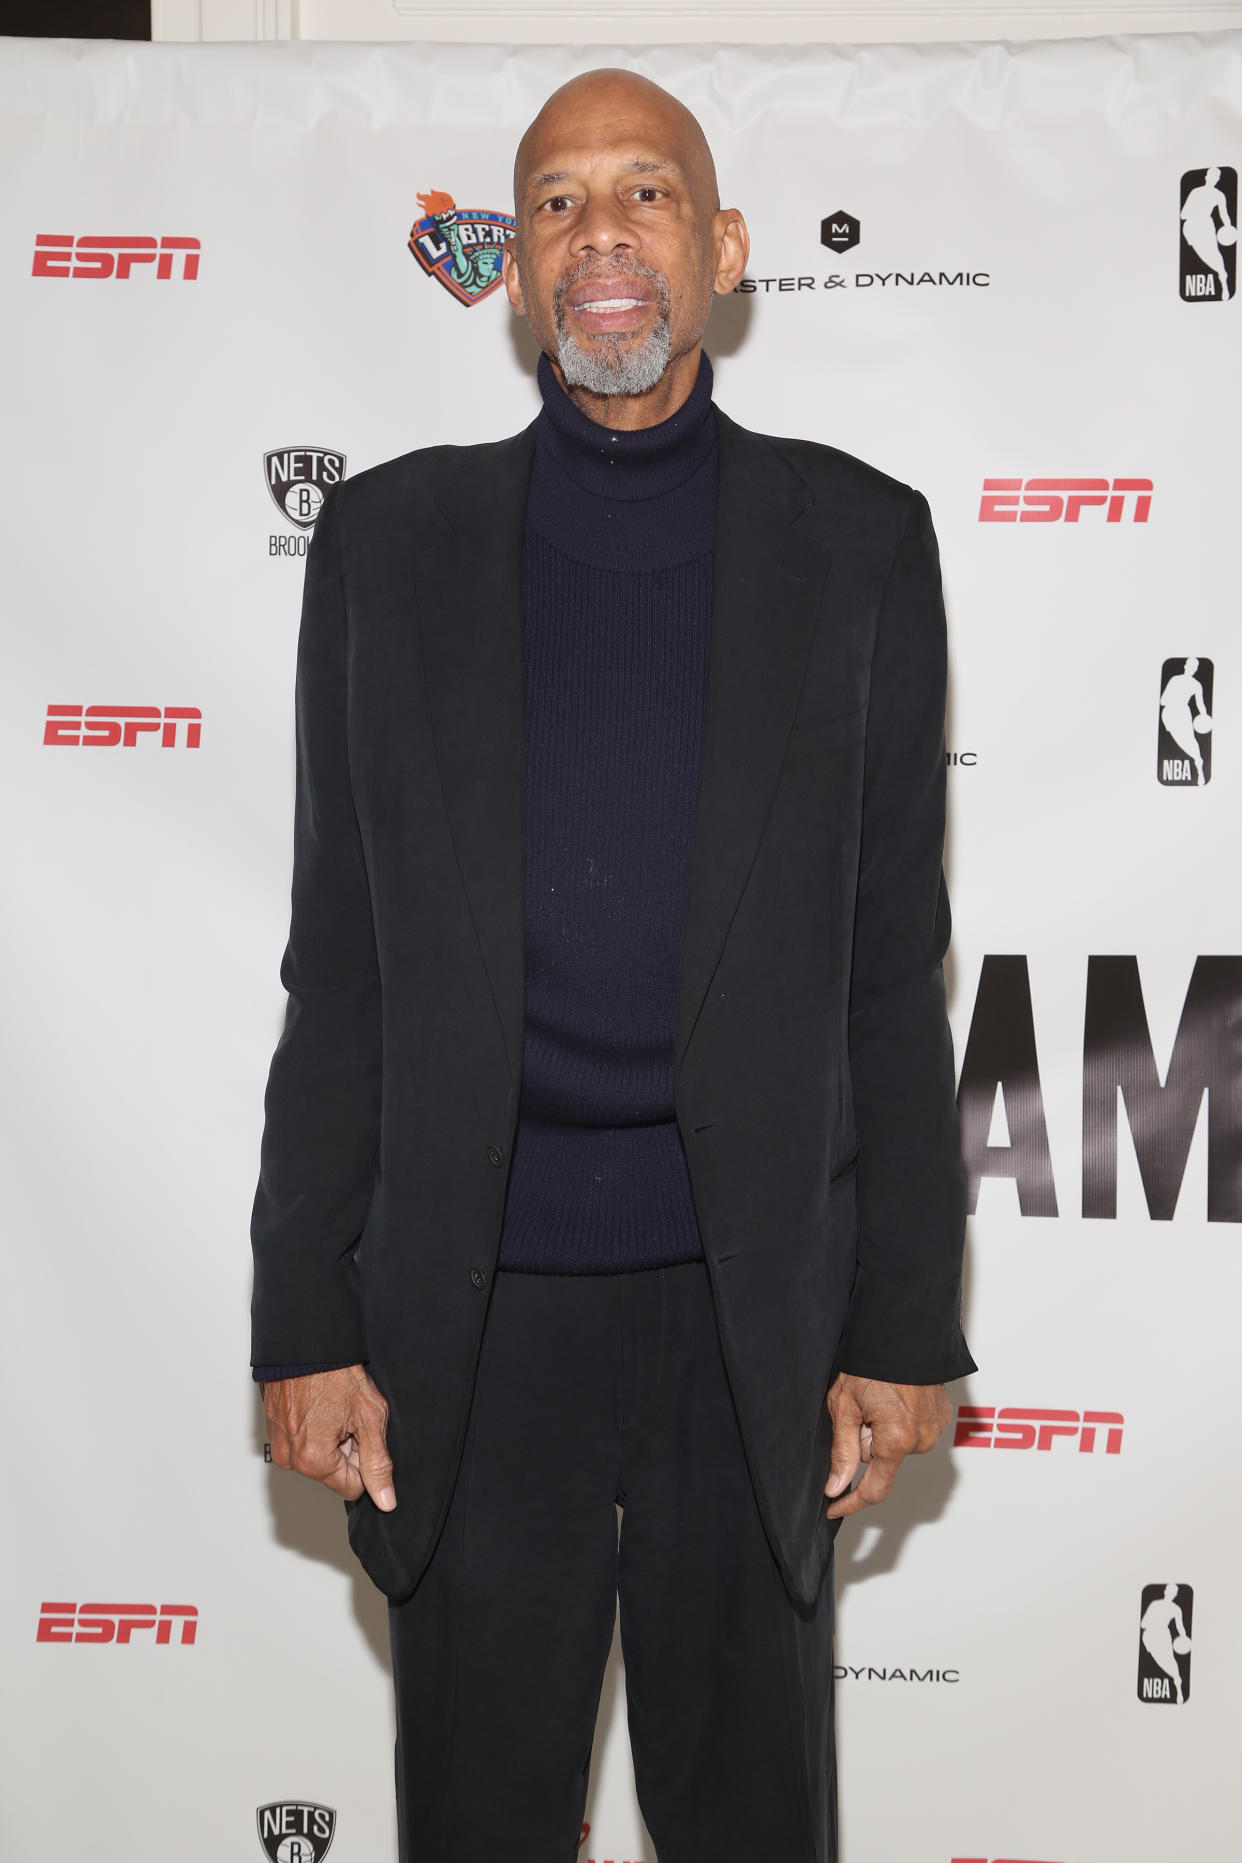 NEW YORK, NY - FEBRUARY 11: Kareem Abdul-Jabbar attends Museum Of The City Of New York Winter [Basket] Ball at Museum of the City of New York on February 11, 2020 in New York City. (Photo by Sylvain Gaboury/Patrick McMullan via Getty Images)